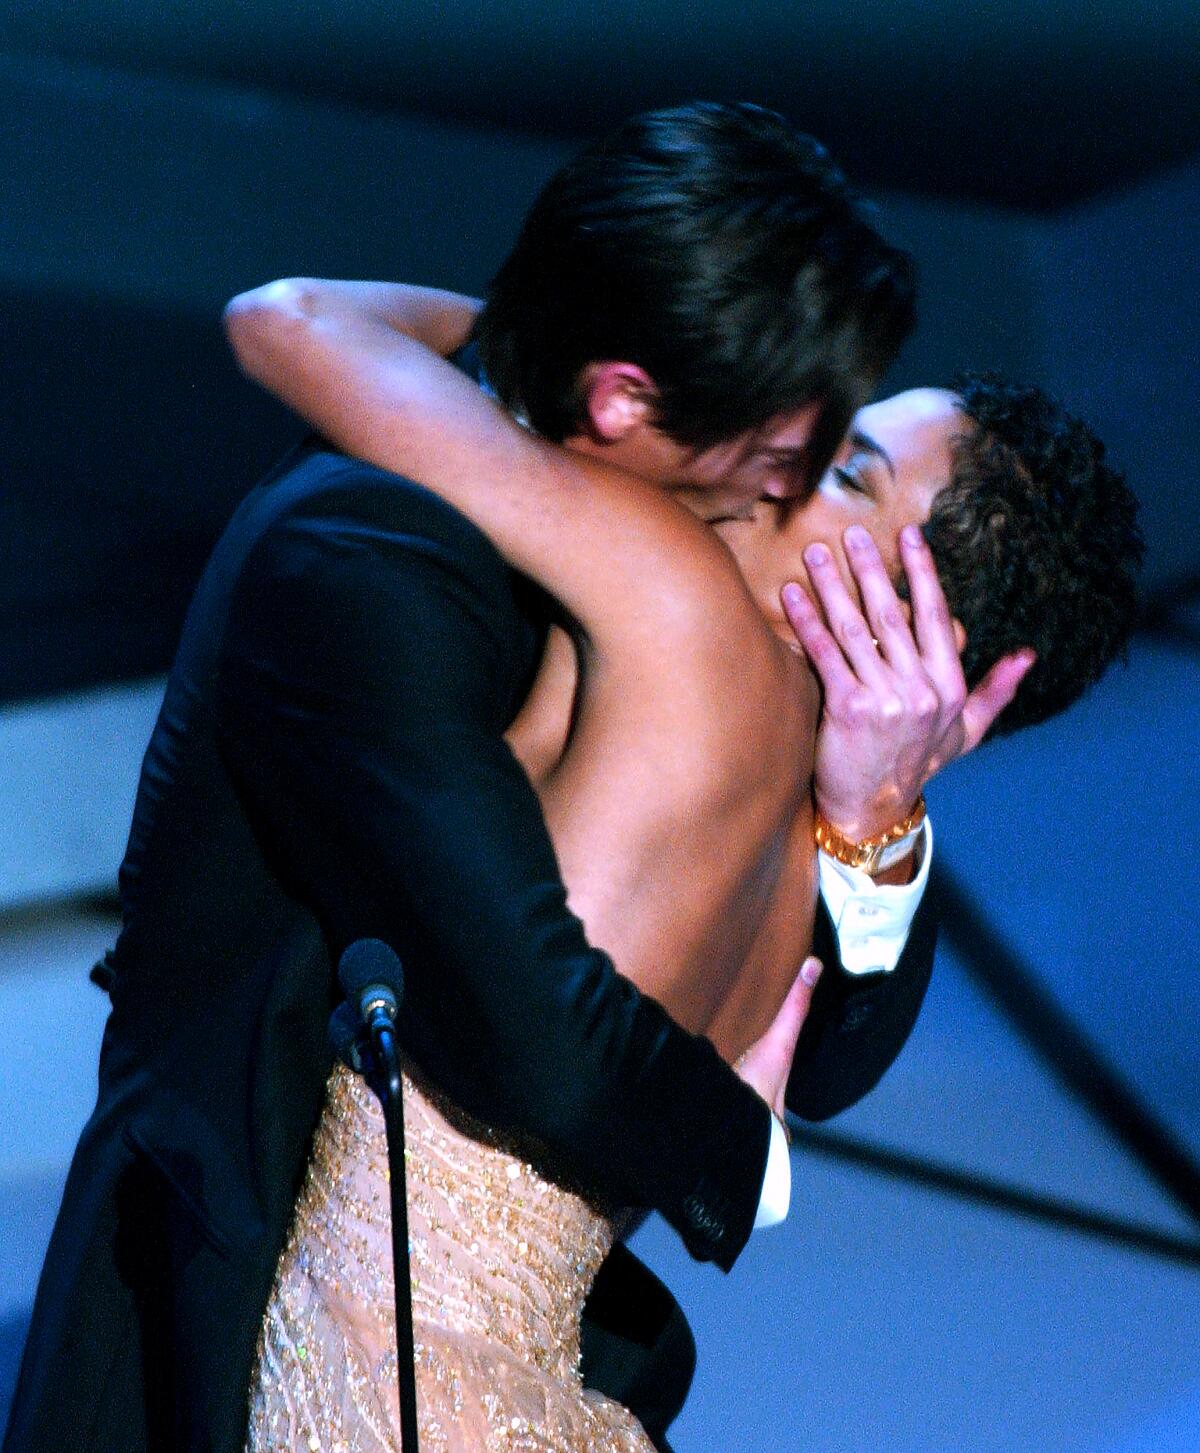 A man and woman kissing onstage